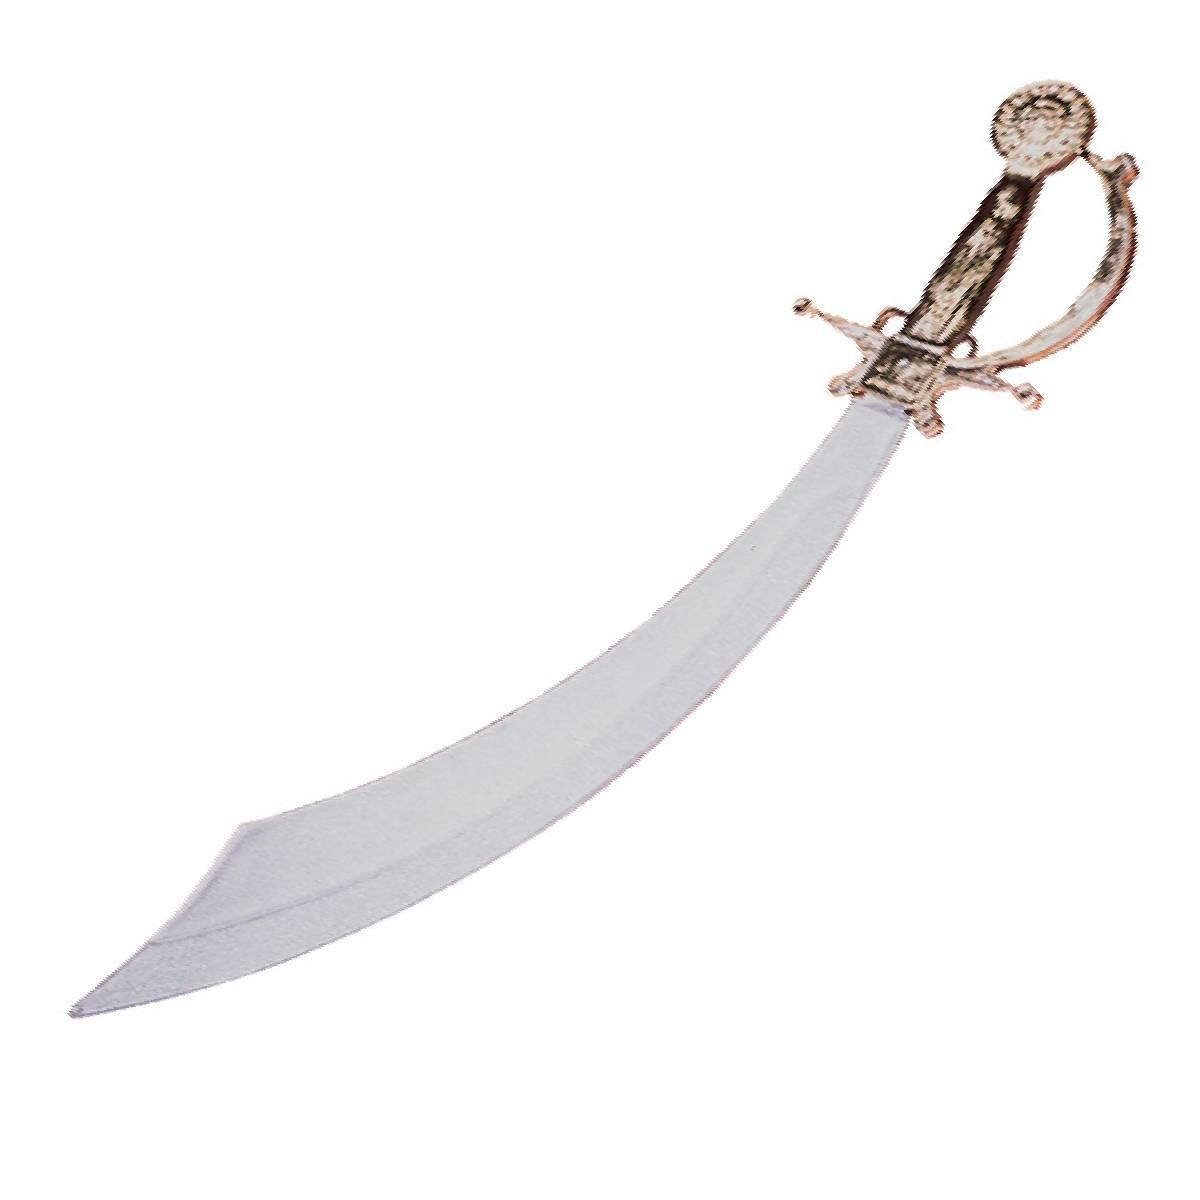 Pirate Cutlass Costume Accessory by Rubies 1589 available here at Karnival Costumes online party shop